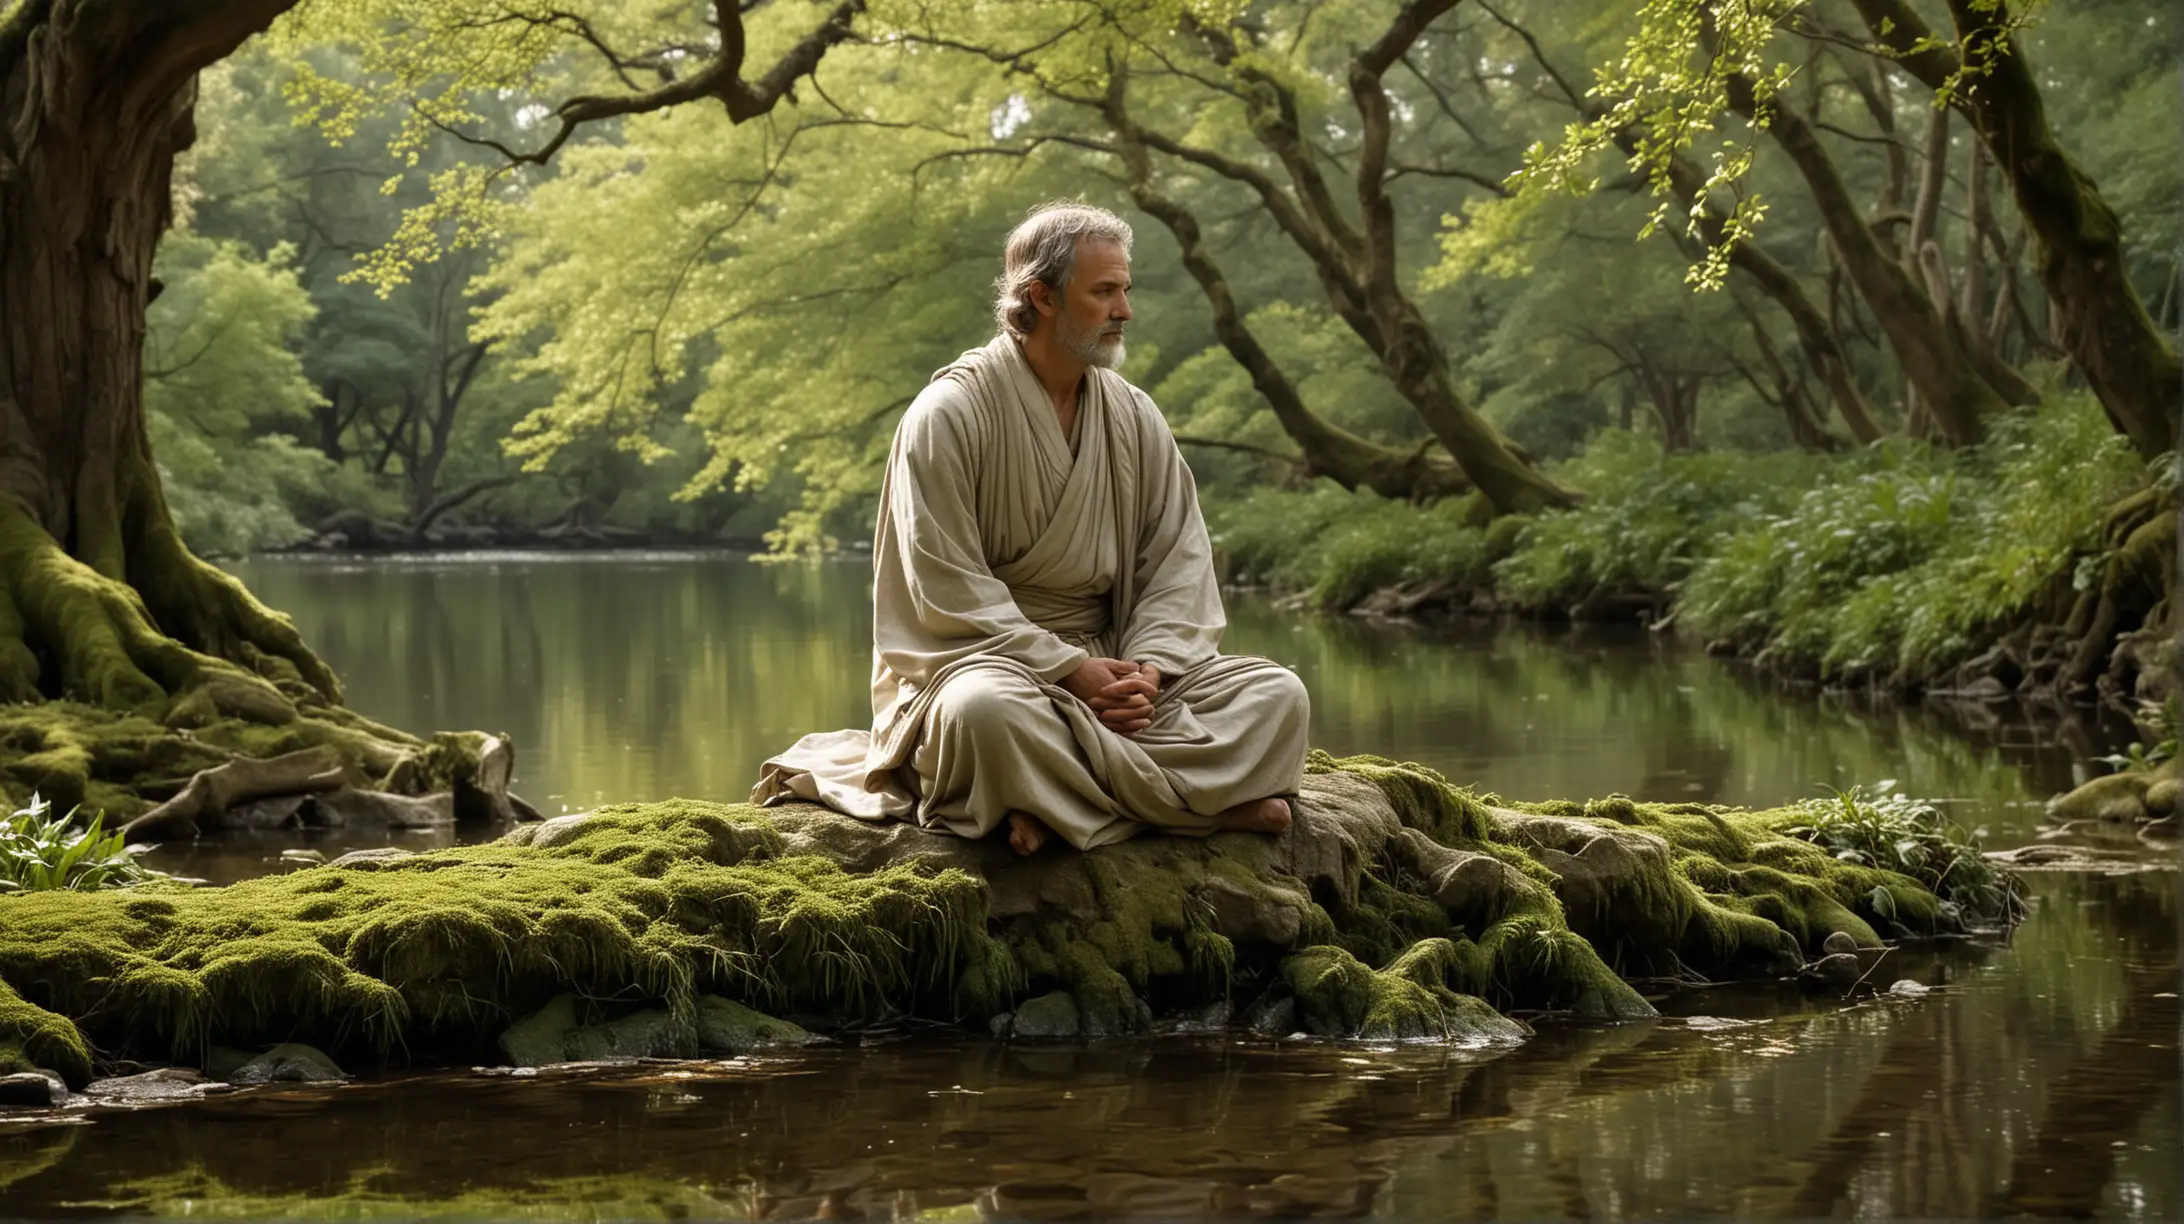 Stoic Philosopher Reflecting by Tranquil Stream